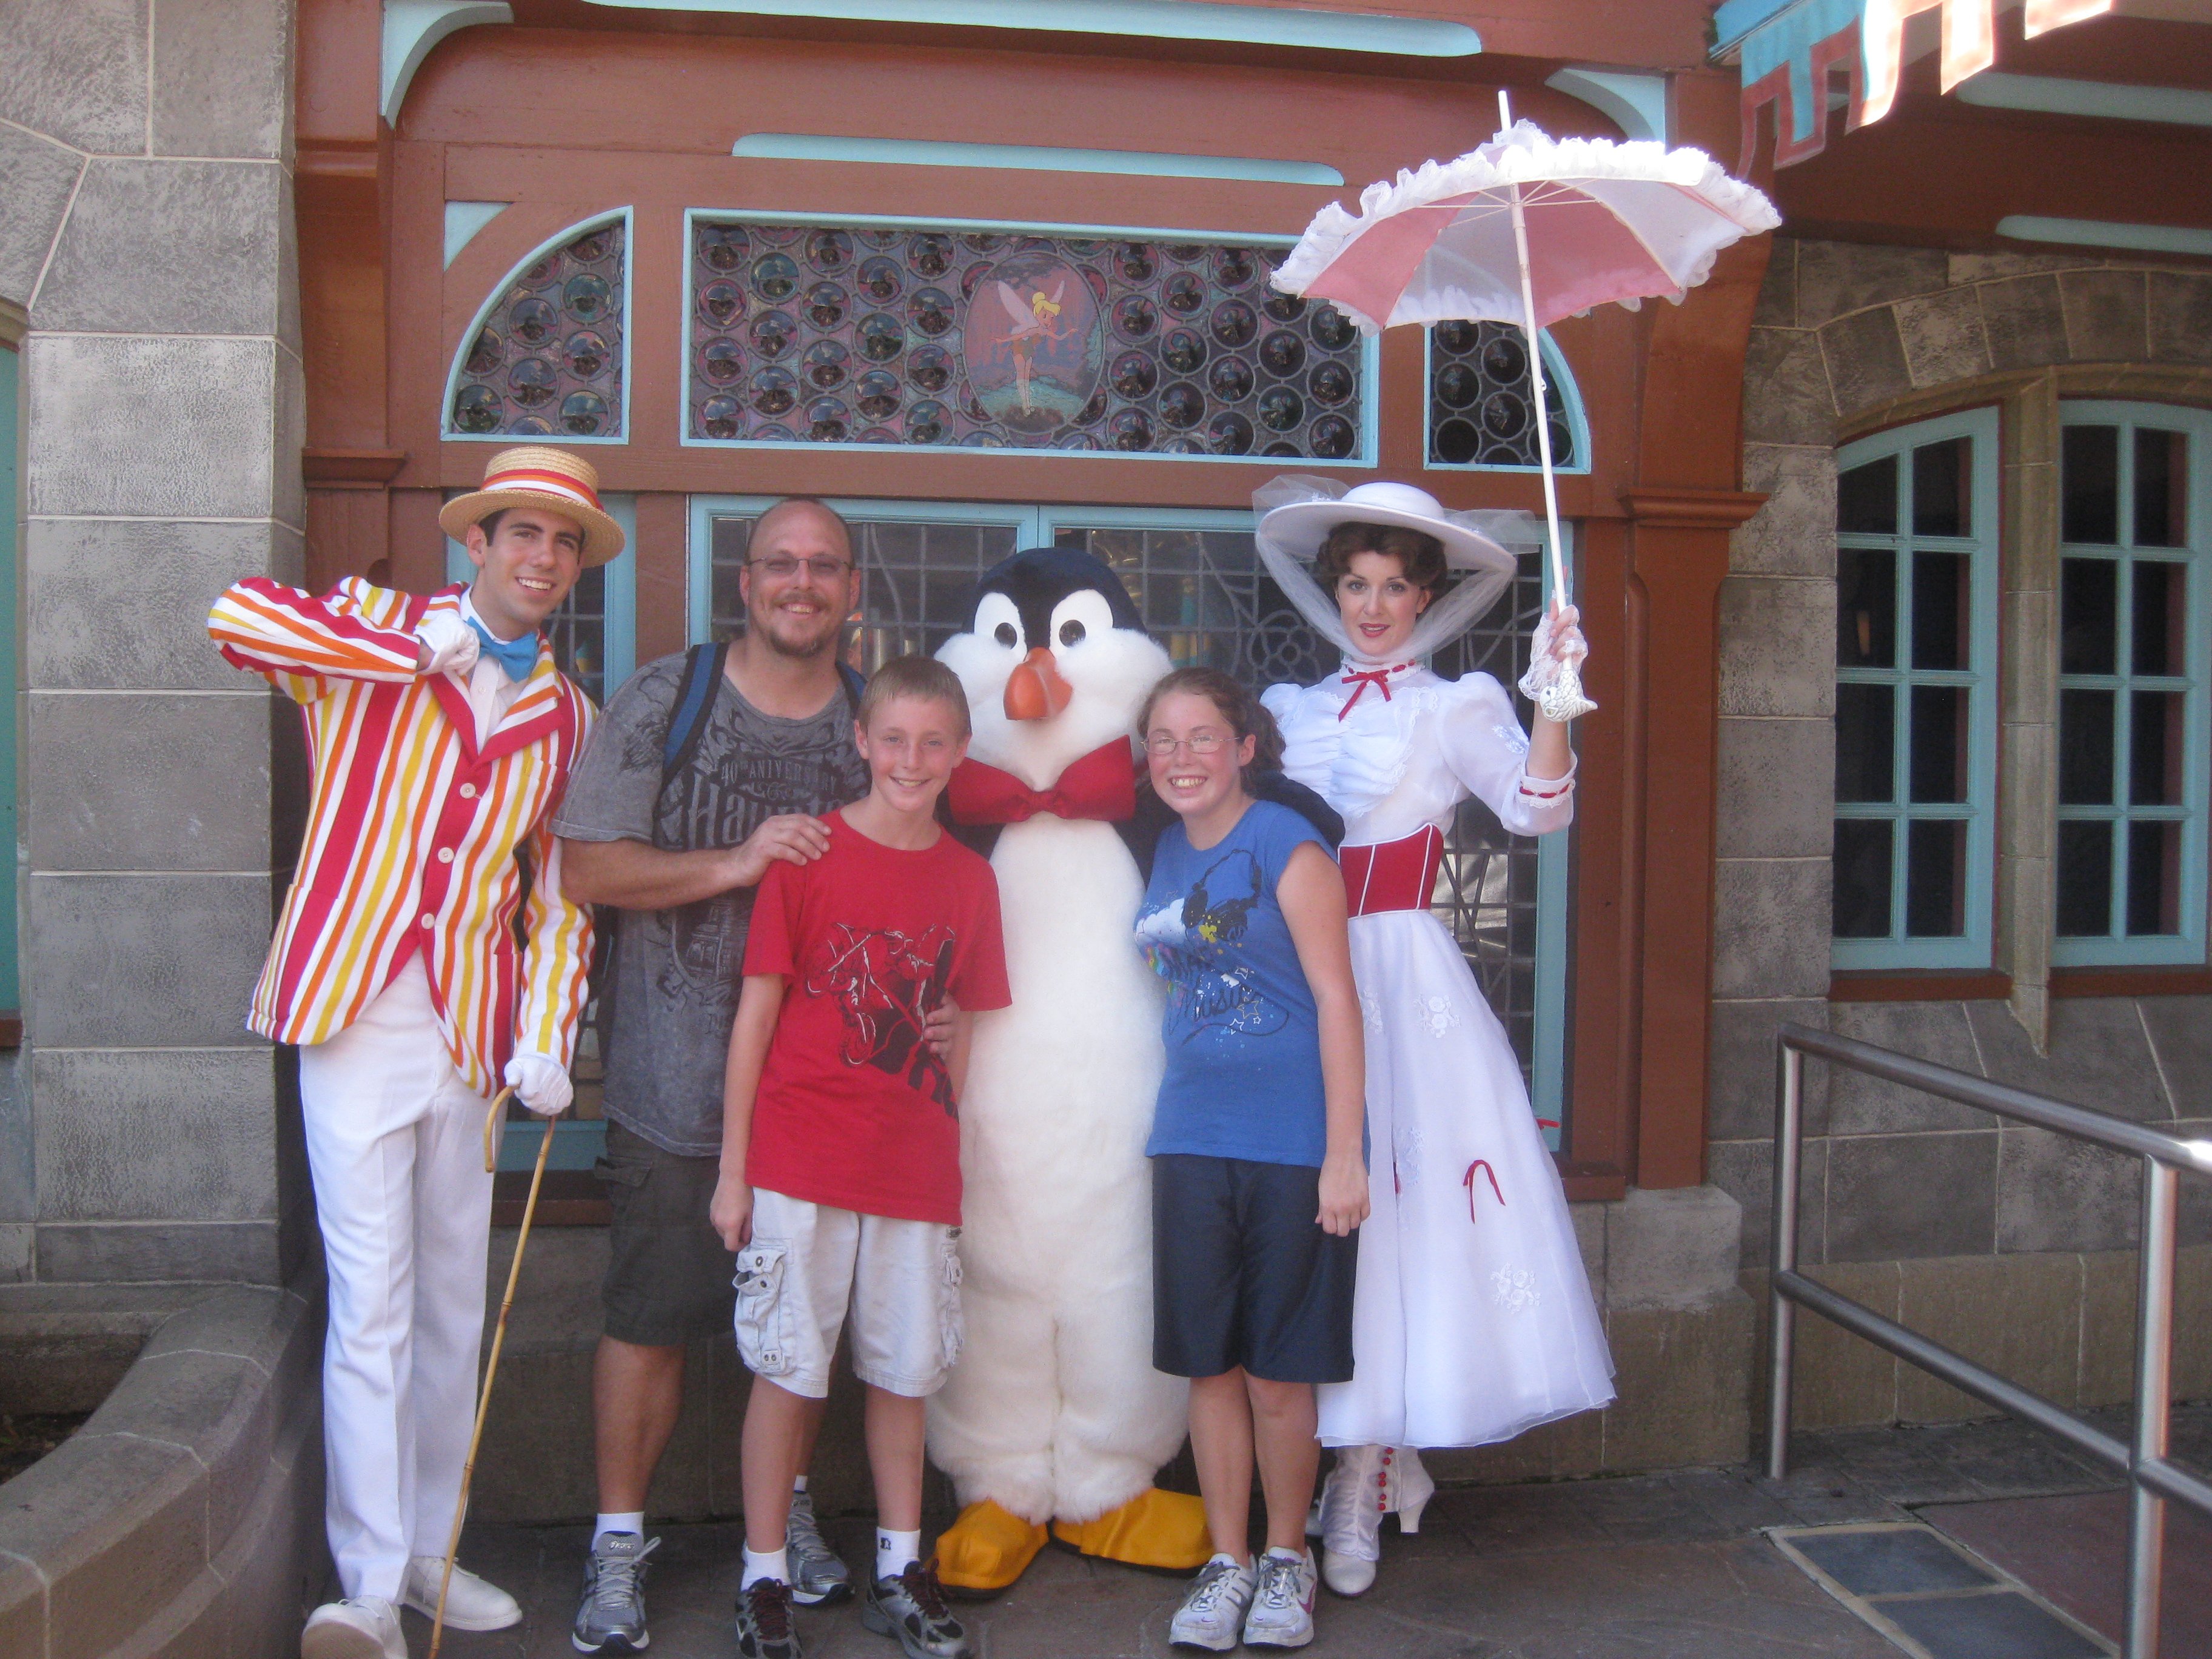 Bert and Mary Poppins in the Magic Kingdom in 2010